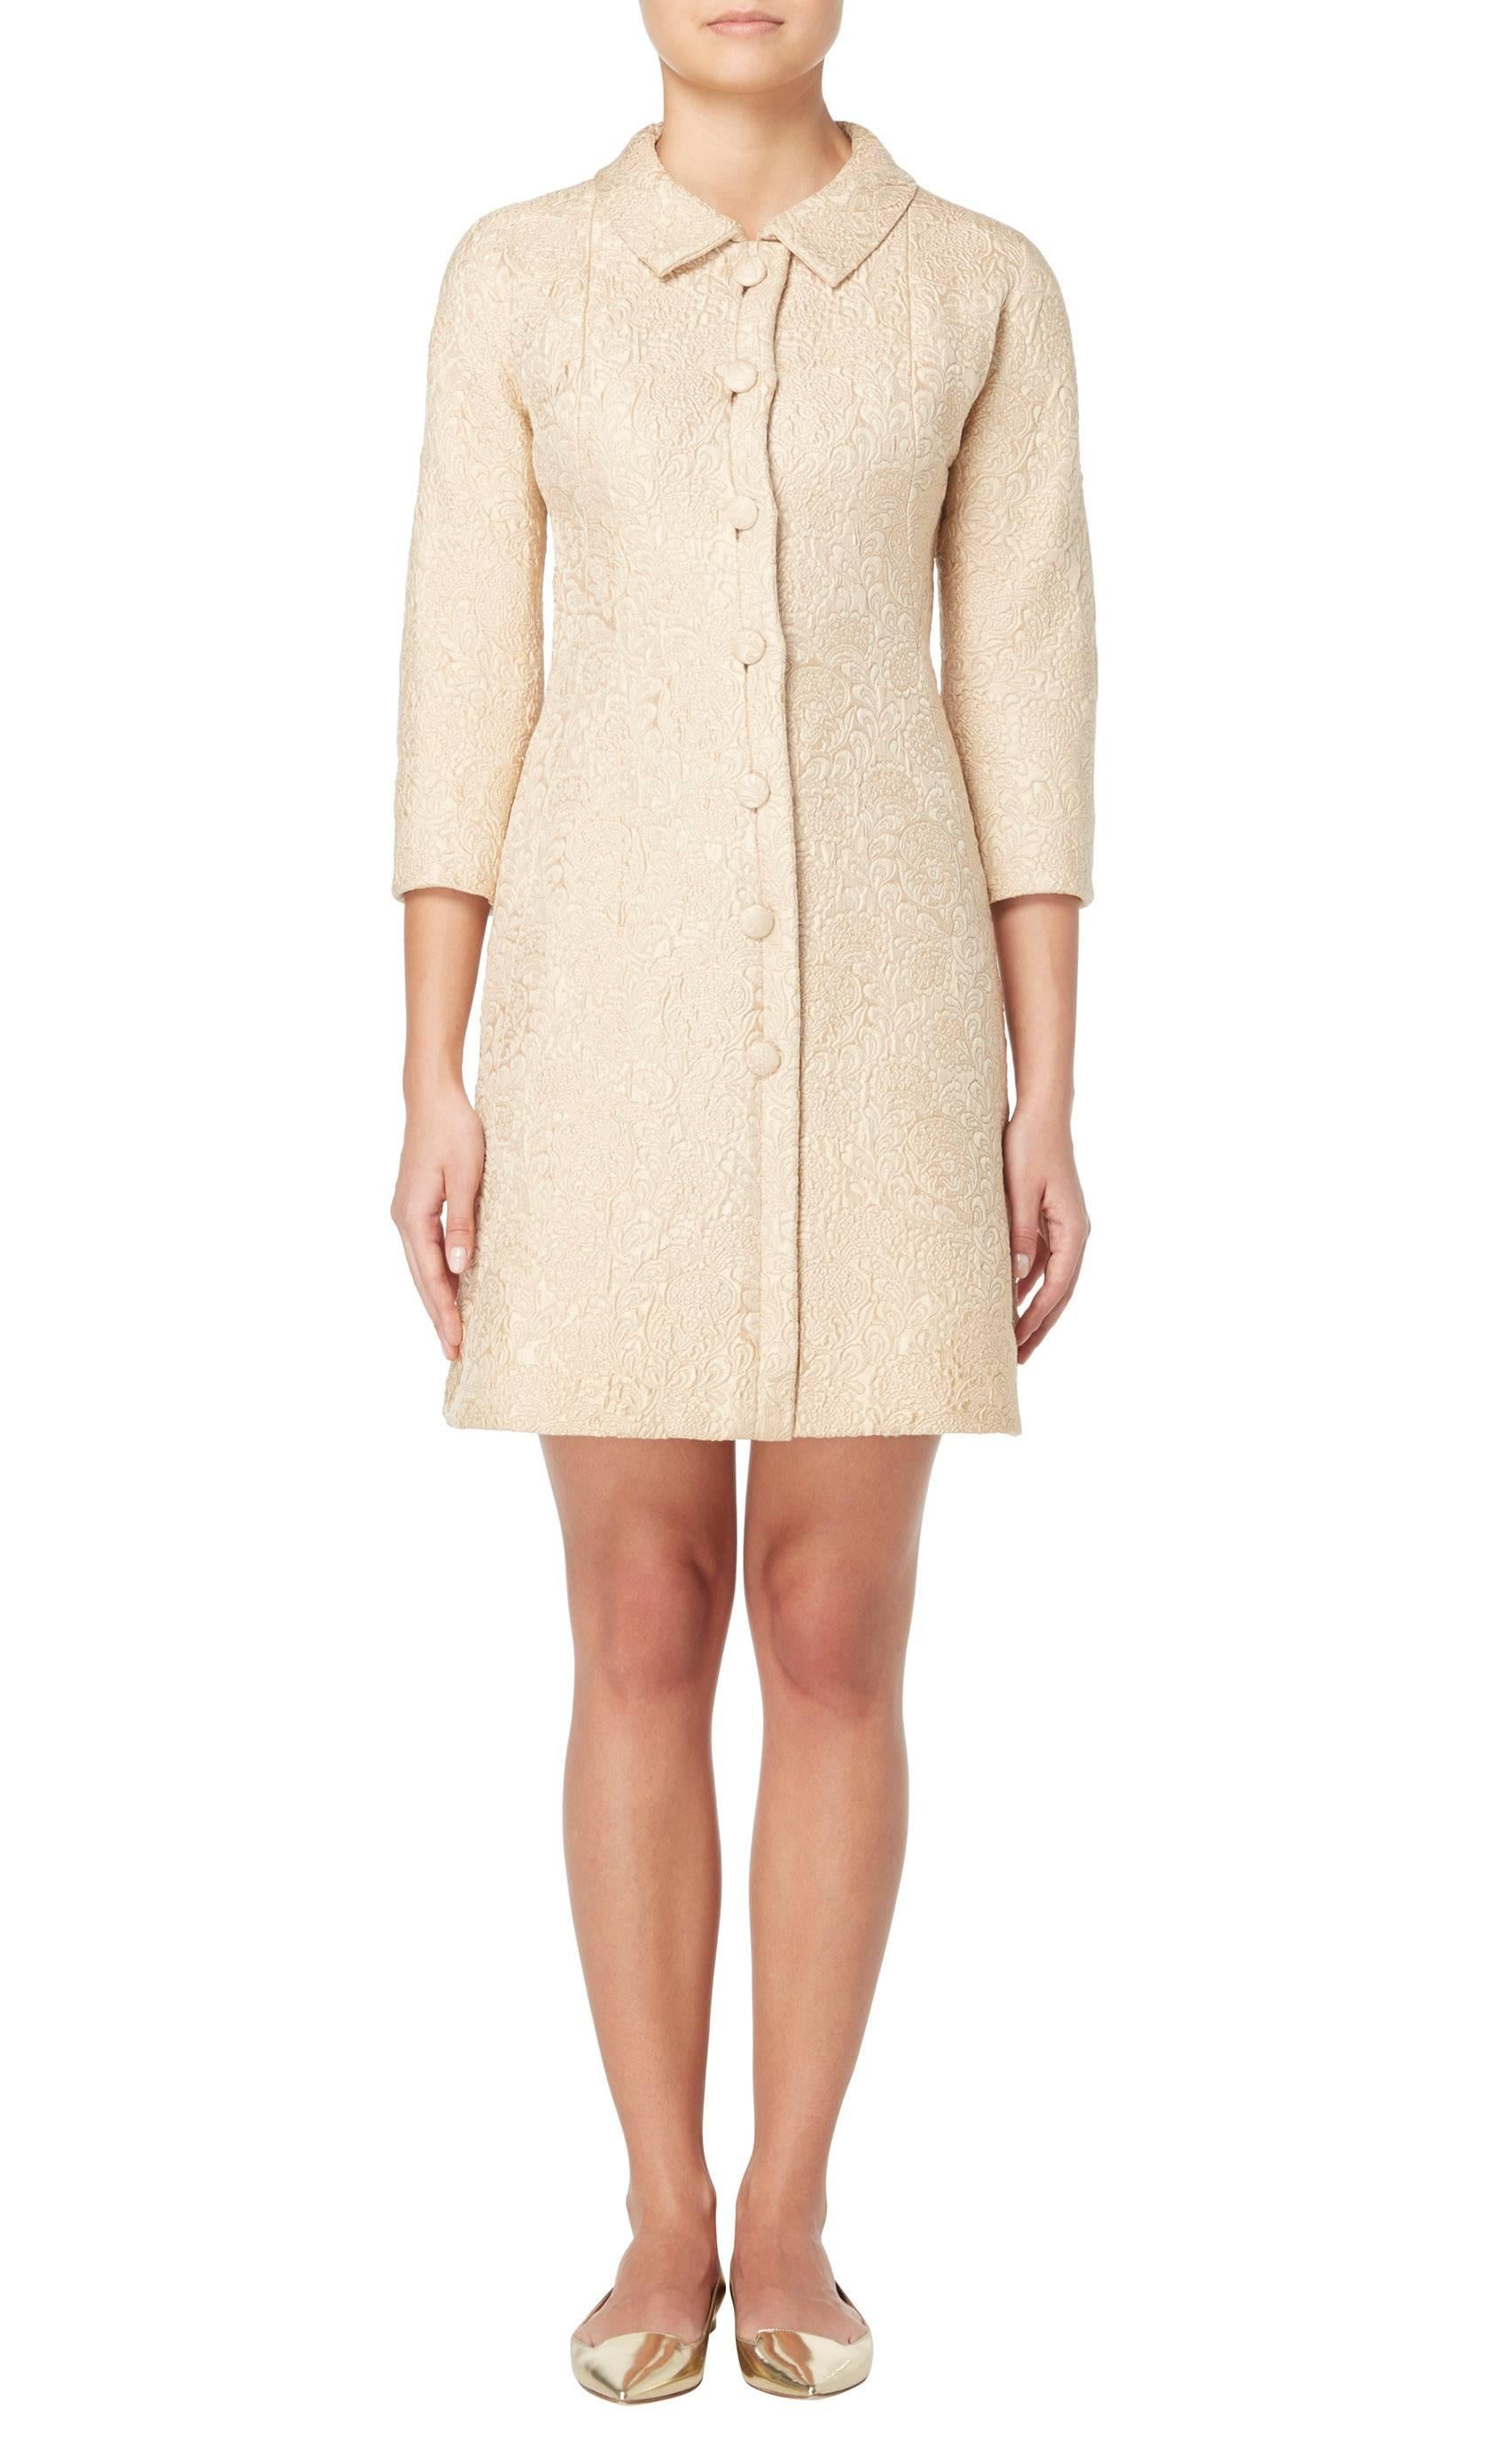 An incredible example of Balenciaga’s master tailoring, this haute couture coat dress is the height of chic. Constructed in beige silk brocatelle with a slight golden sheen, which shimmers in the light, the coat dress features seams that enhance the